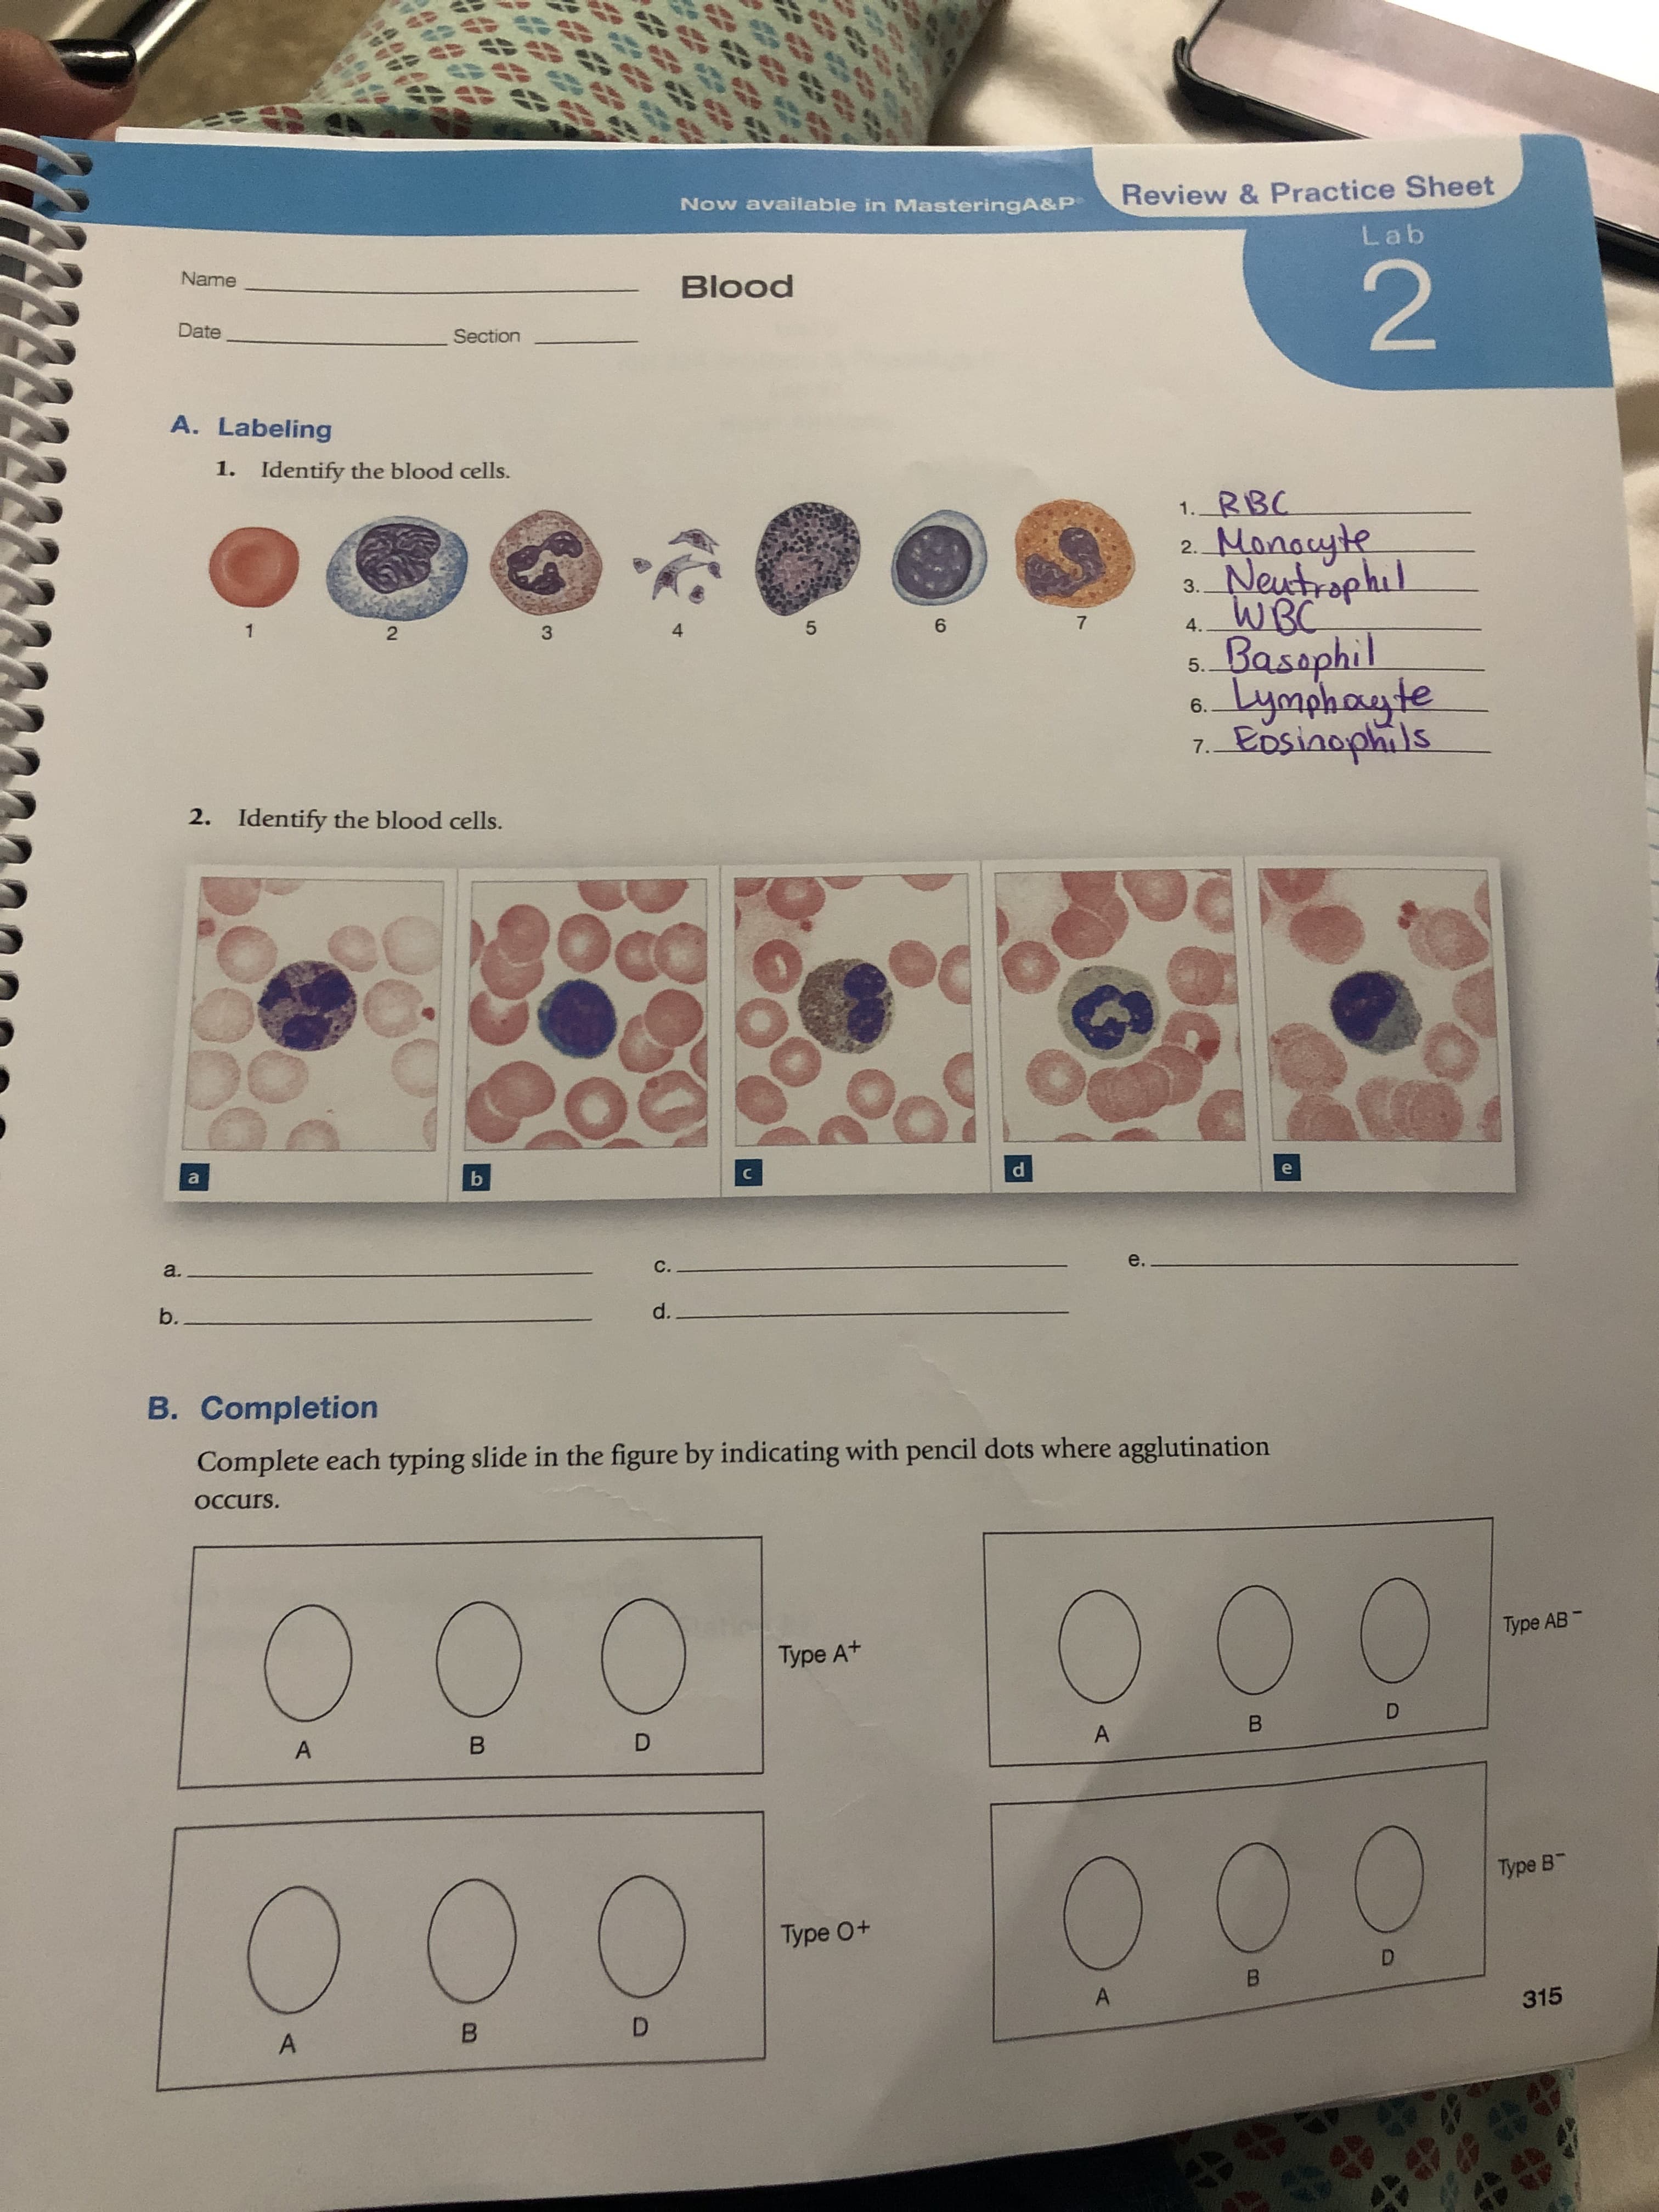 Now available in MasteringA&P
Review & Practice Sheet
Lab
Name
Blood
2
Date
Section
A. Labeling
1.
Identify the blood cells.
RBC
1.
Manauyle
Neutrophil
WBC
Basaphil
Lymphayte
Eosiaaphils
2.
3.
1
2
3
4
5
6
7
4.
5.
6.
7.
2.
Identify the blood cells.
a
b
a.
C.
e.
b.
d.
B. Completion
Complete each typing slide in the figure by indicating with pencil dots where agglutination
Occurs.
Type AB
Type At
A
B
D
B
A
Type B
Type 0+
D
B
A
D
315
B
A
# td
BP
4 d
ro
##4##
ef
0
